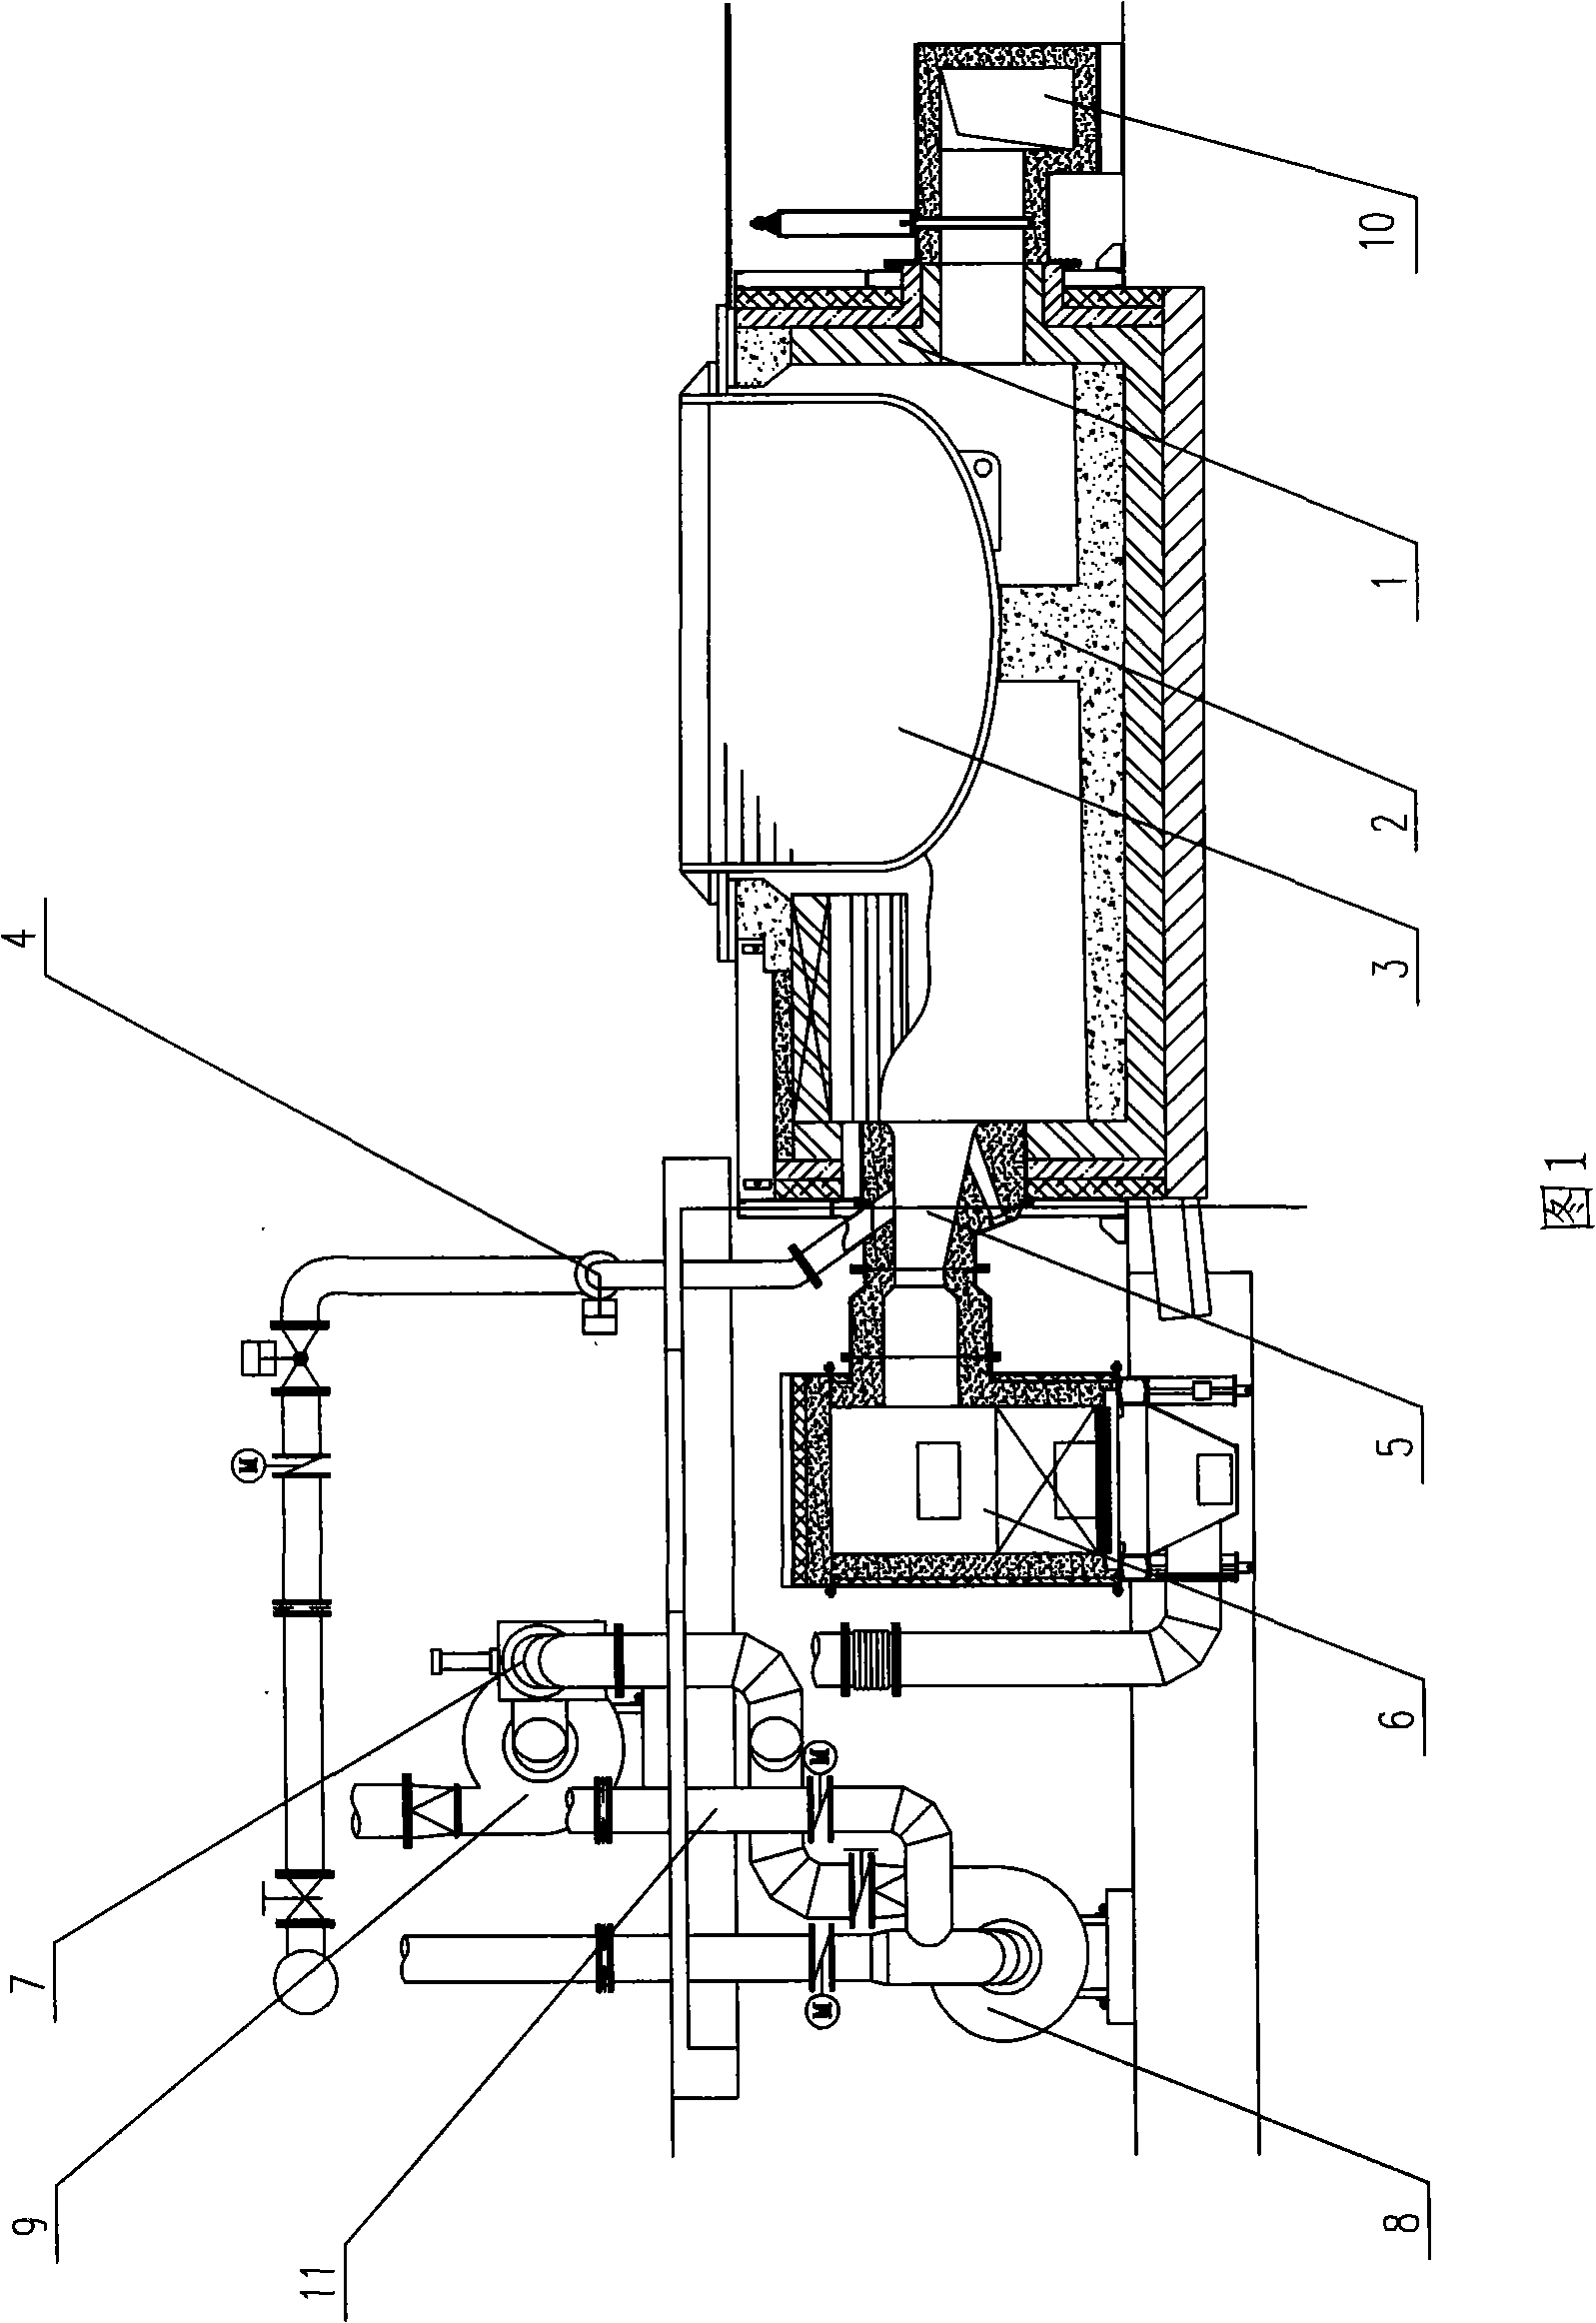 Heat accumulated type lead-melting furnace